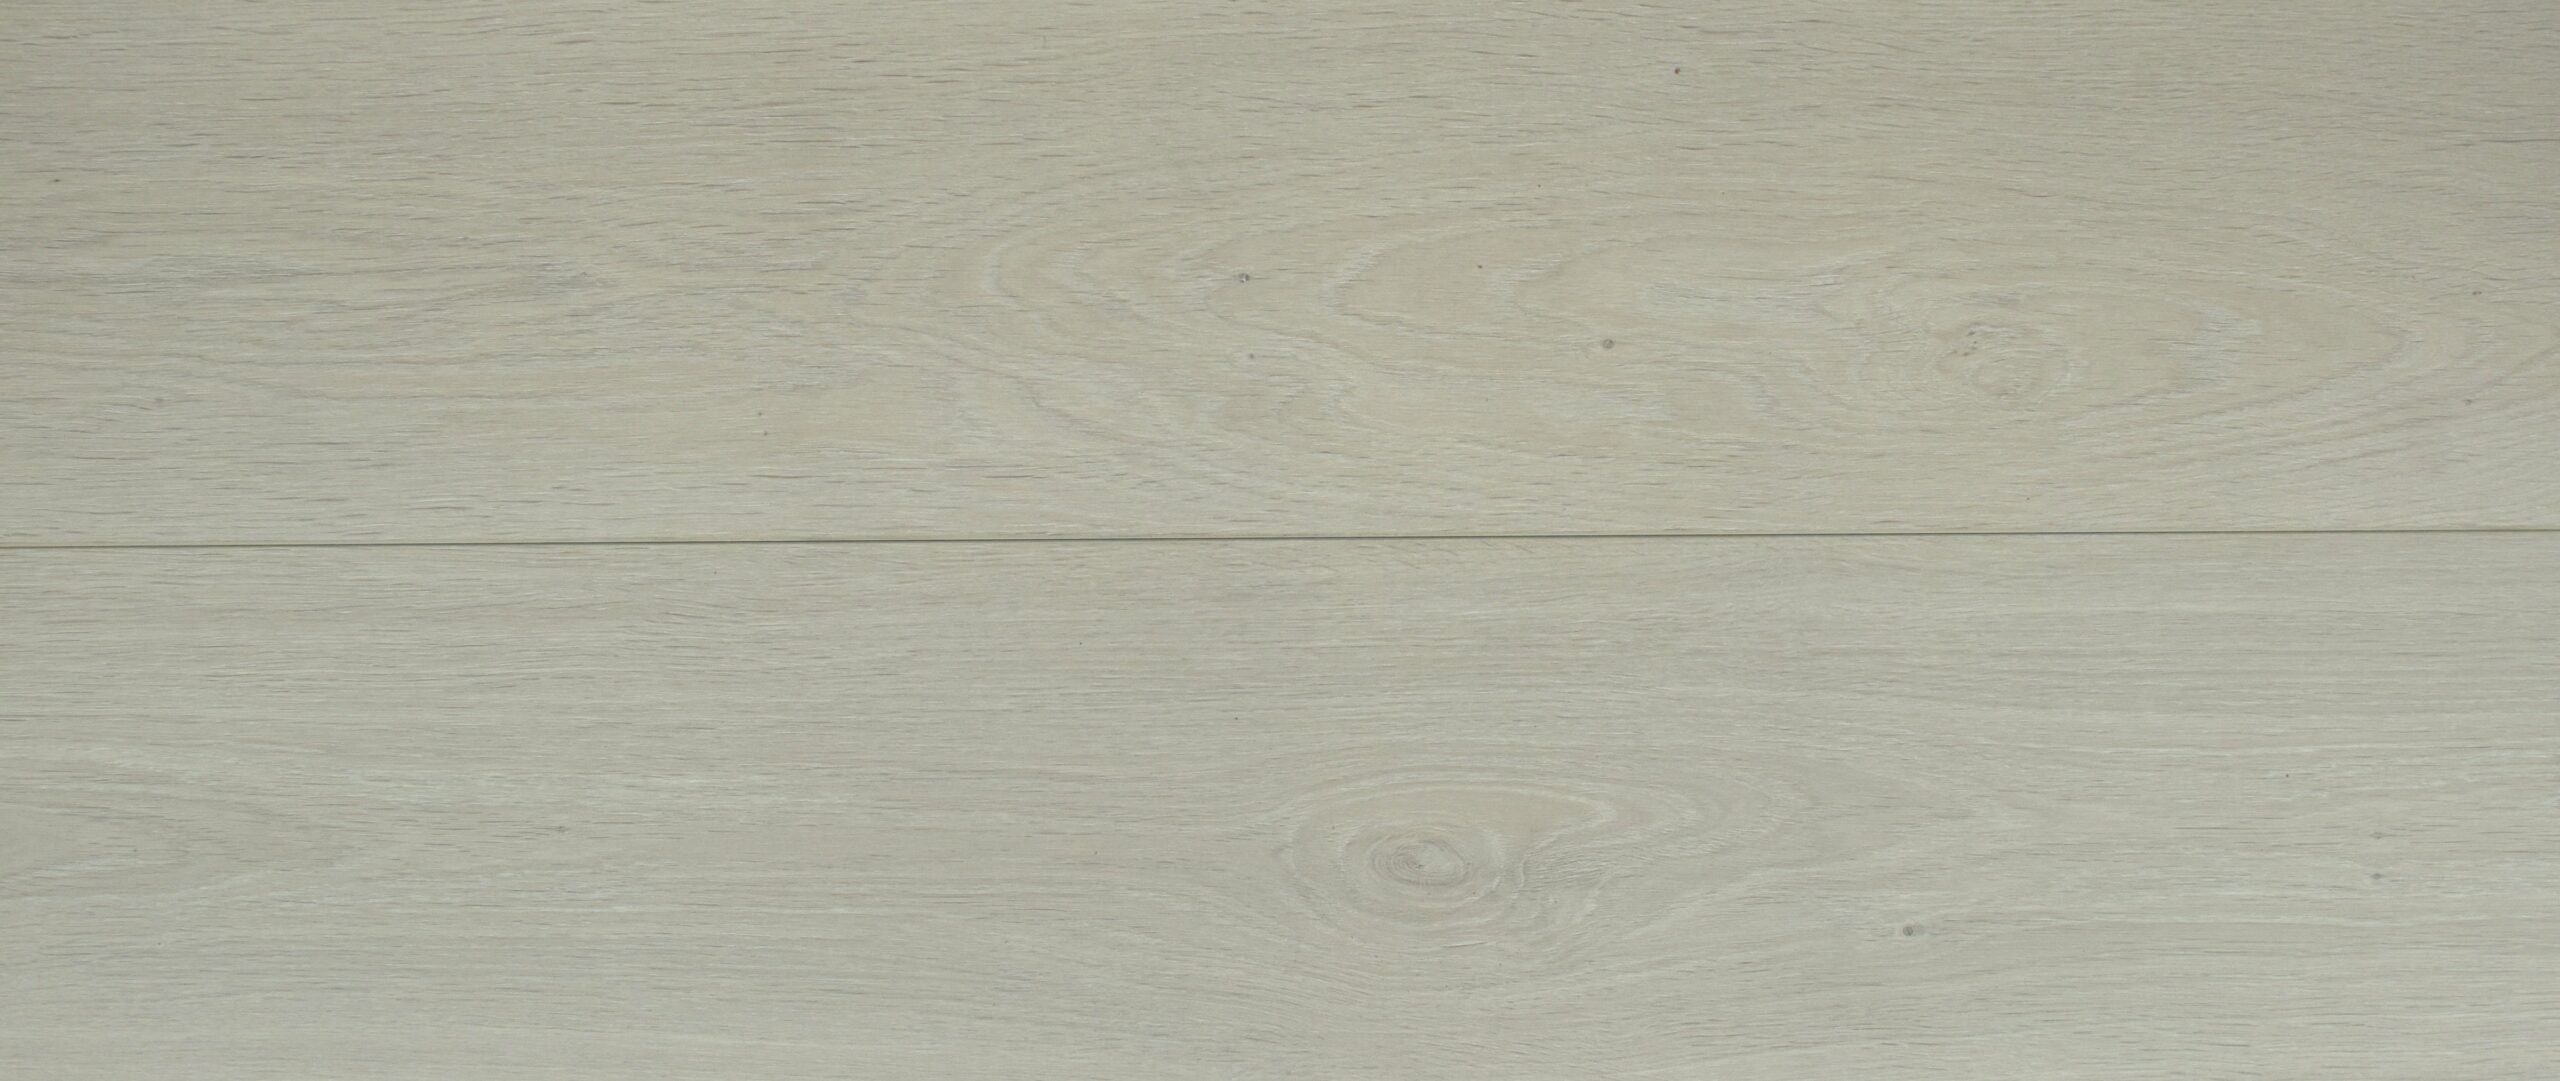 White Oak Trident Laminate Flooring with Built-In EIR Backing and AC4 wear layer